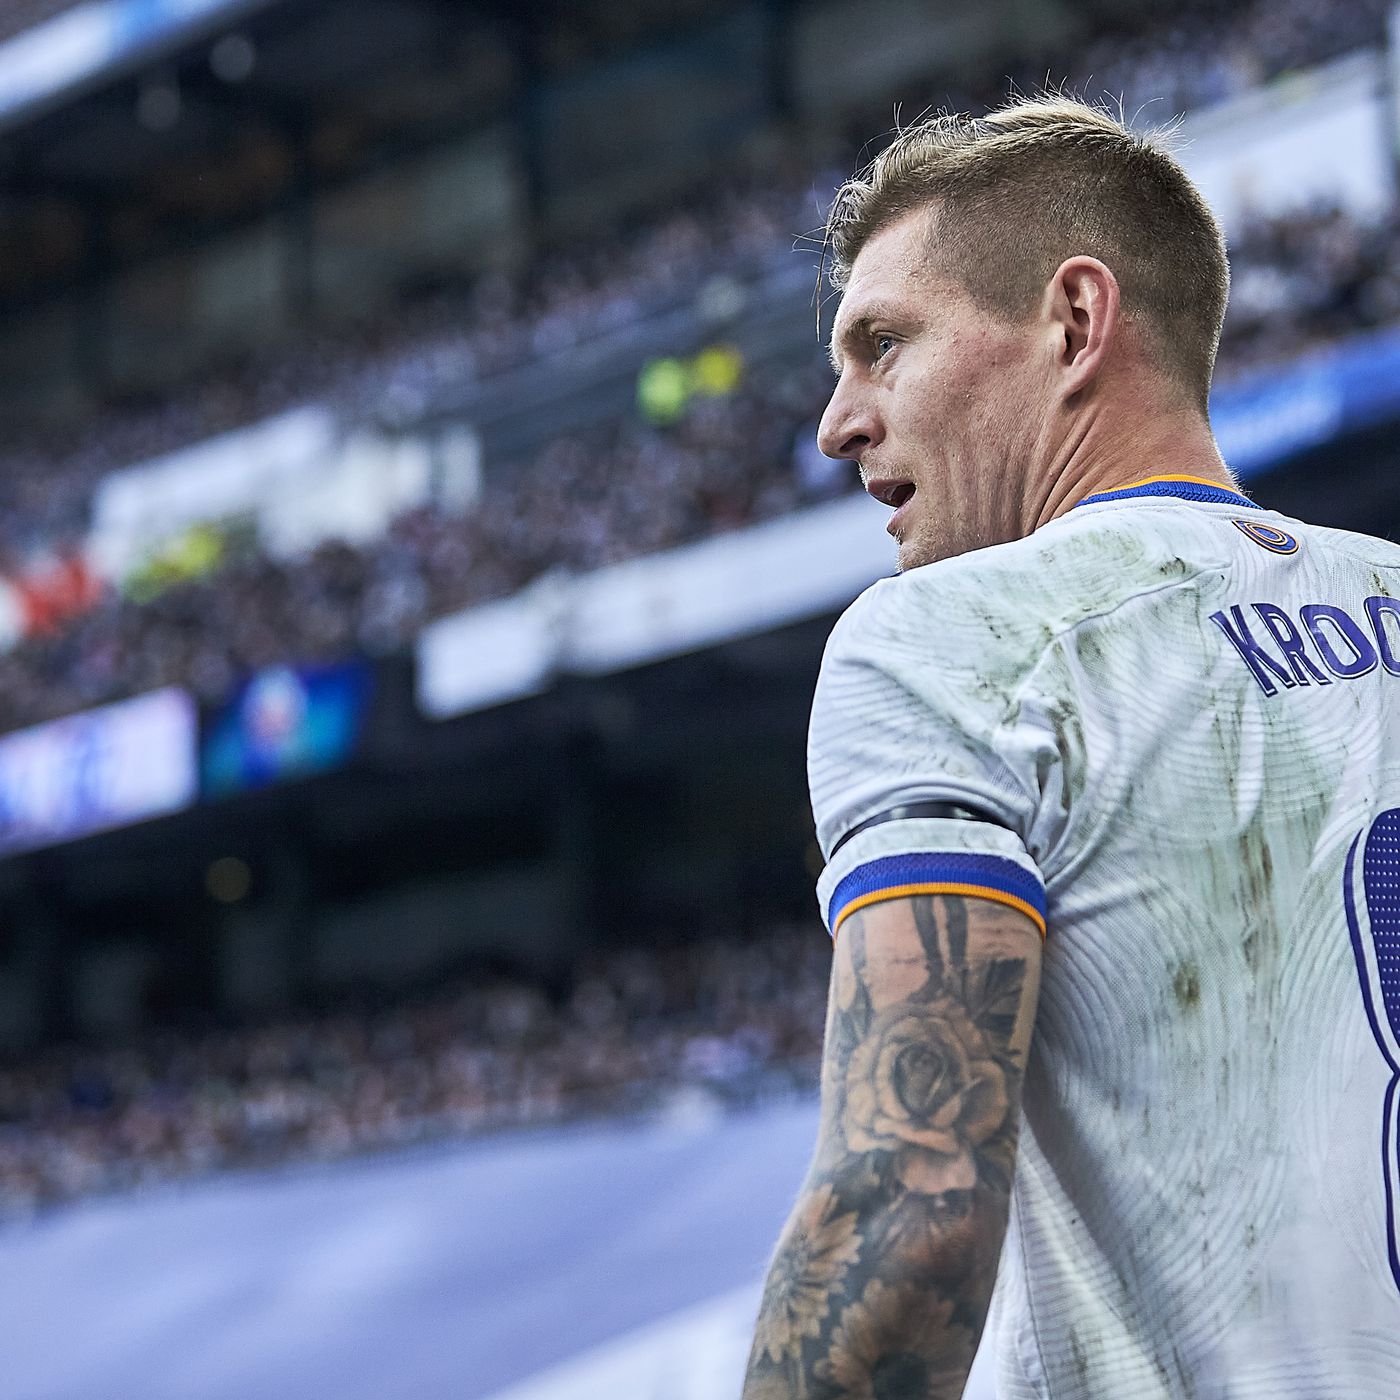 Toni Kroos: “I strongly believe it's important to act respectfully on the  pitch” - Managing Madrid